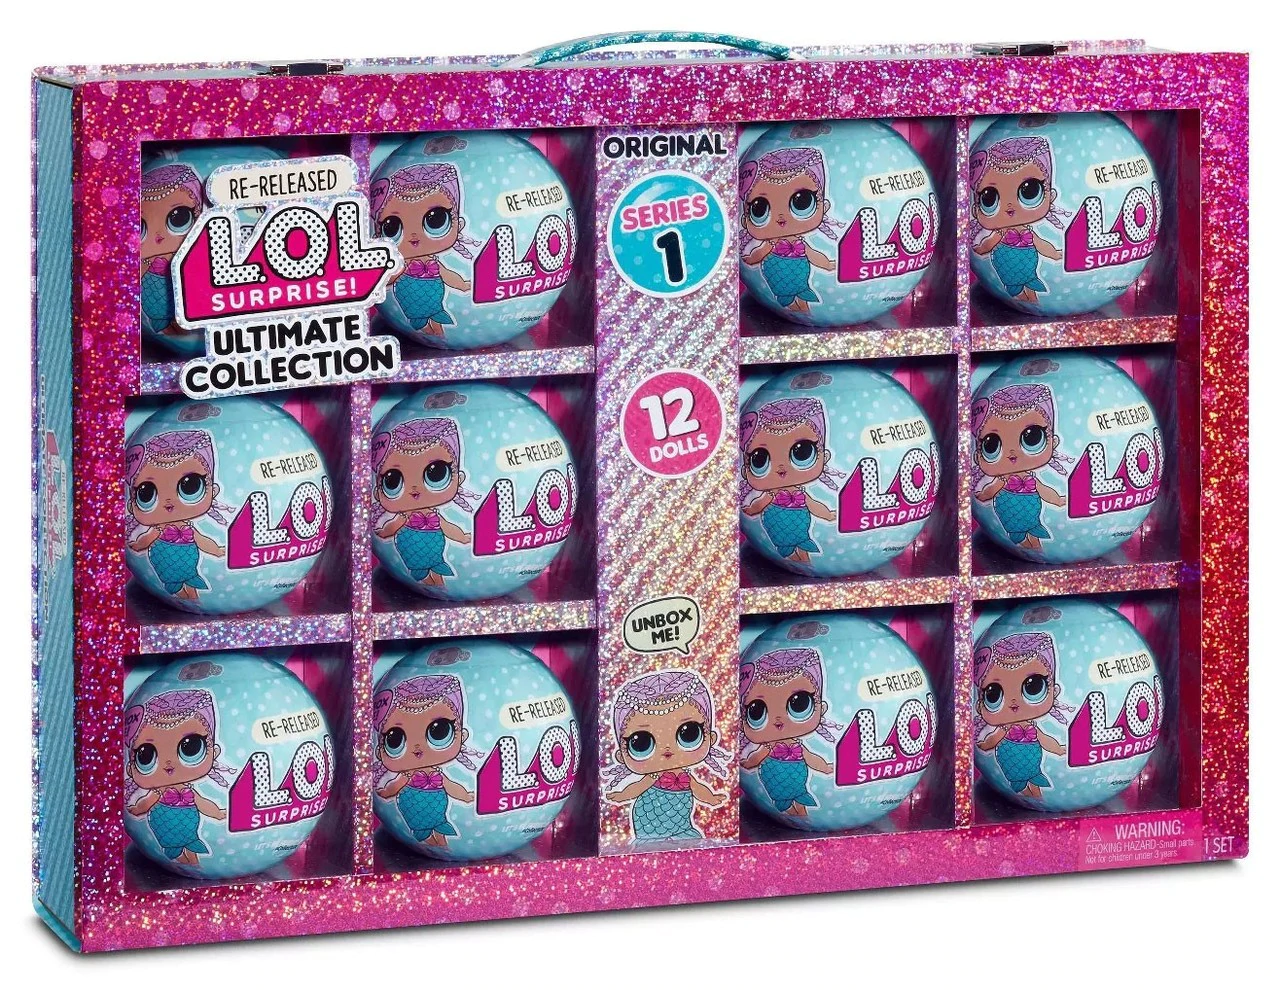 L.O.L. Surprise! S1 Ultimate Collection Merbaby 12 Re-released Dolls